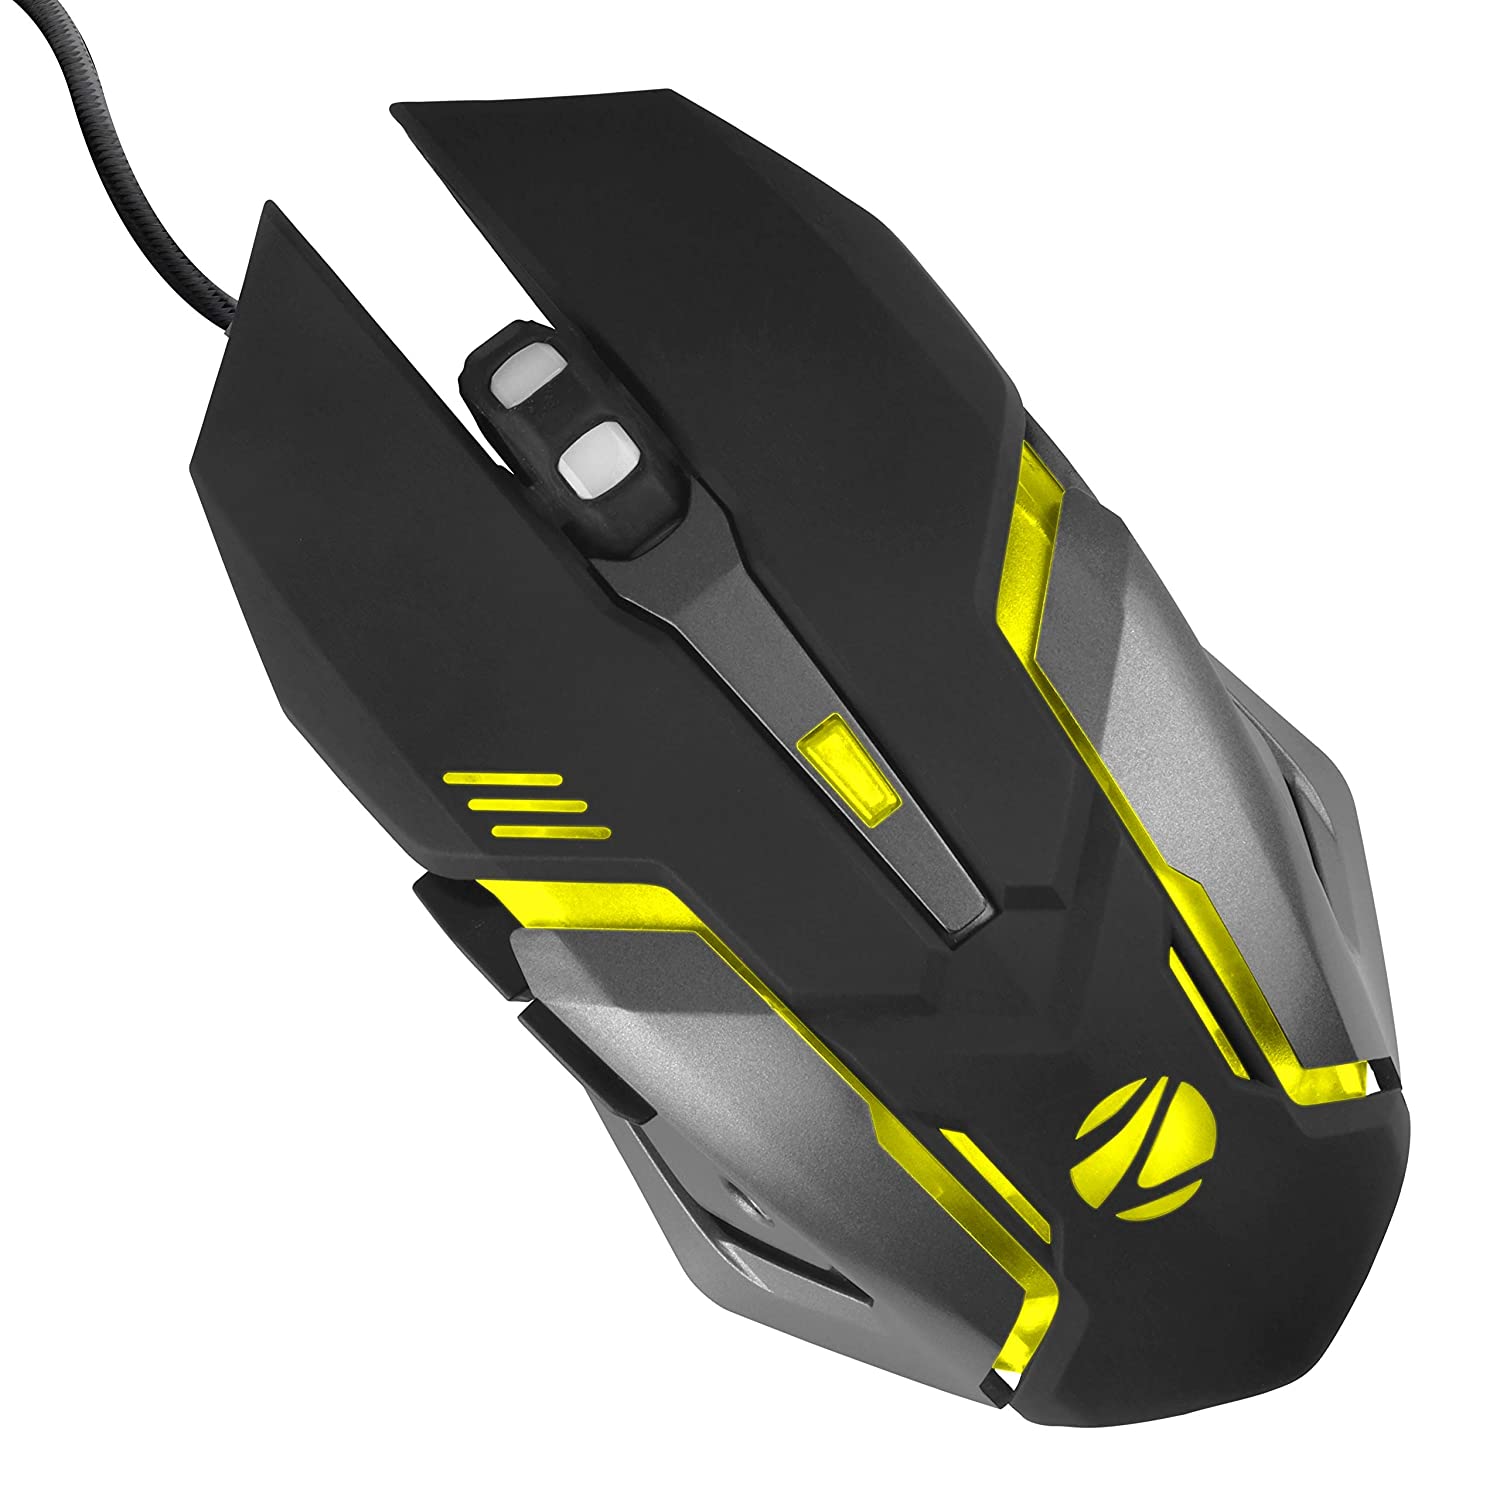 2nd gaming mouse